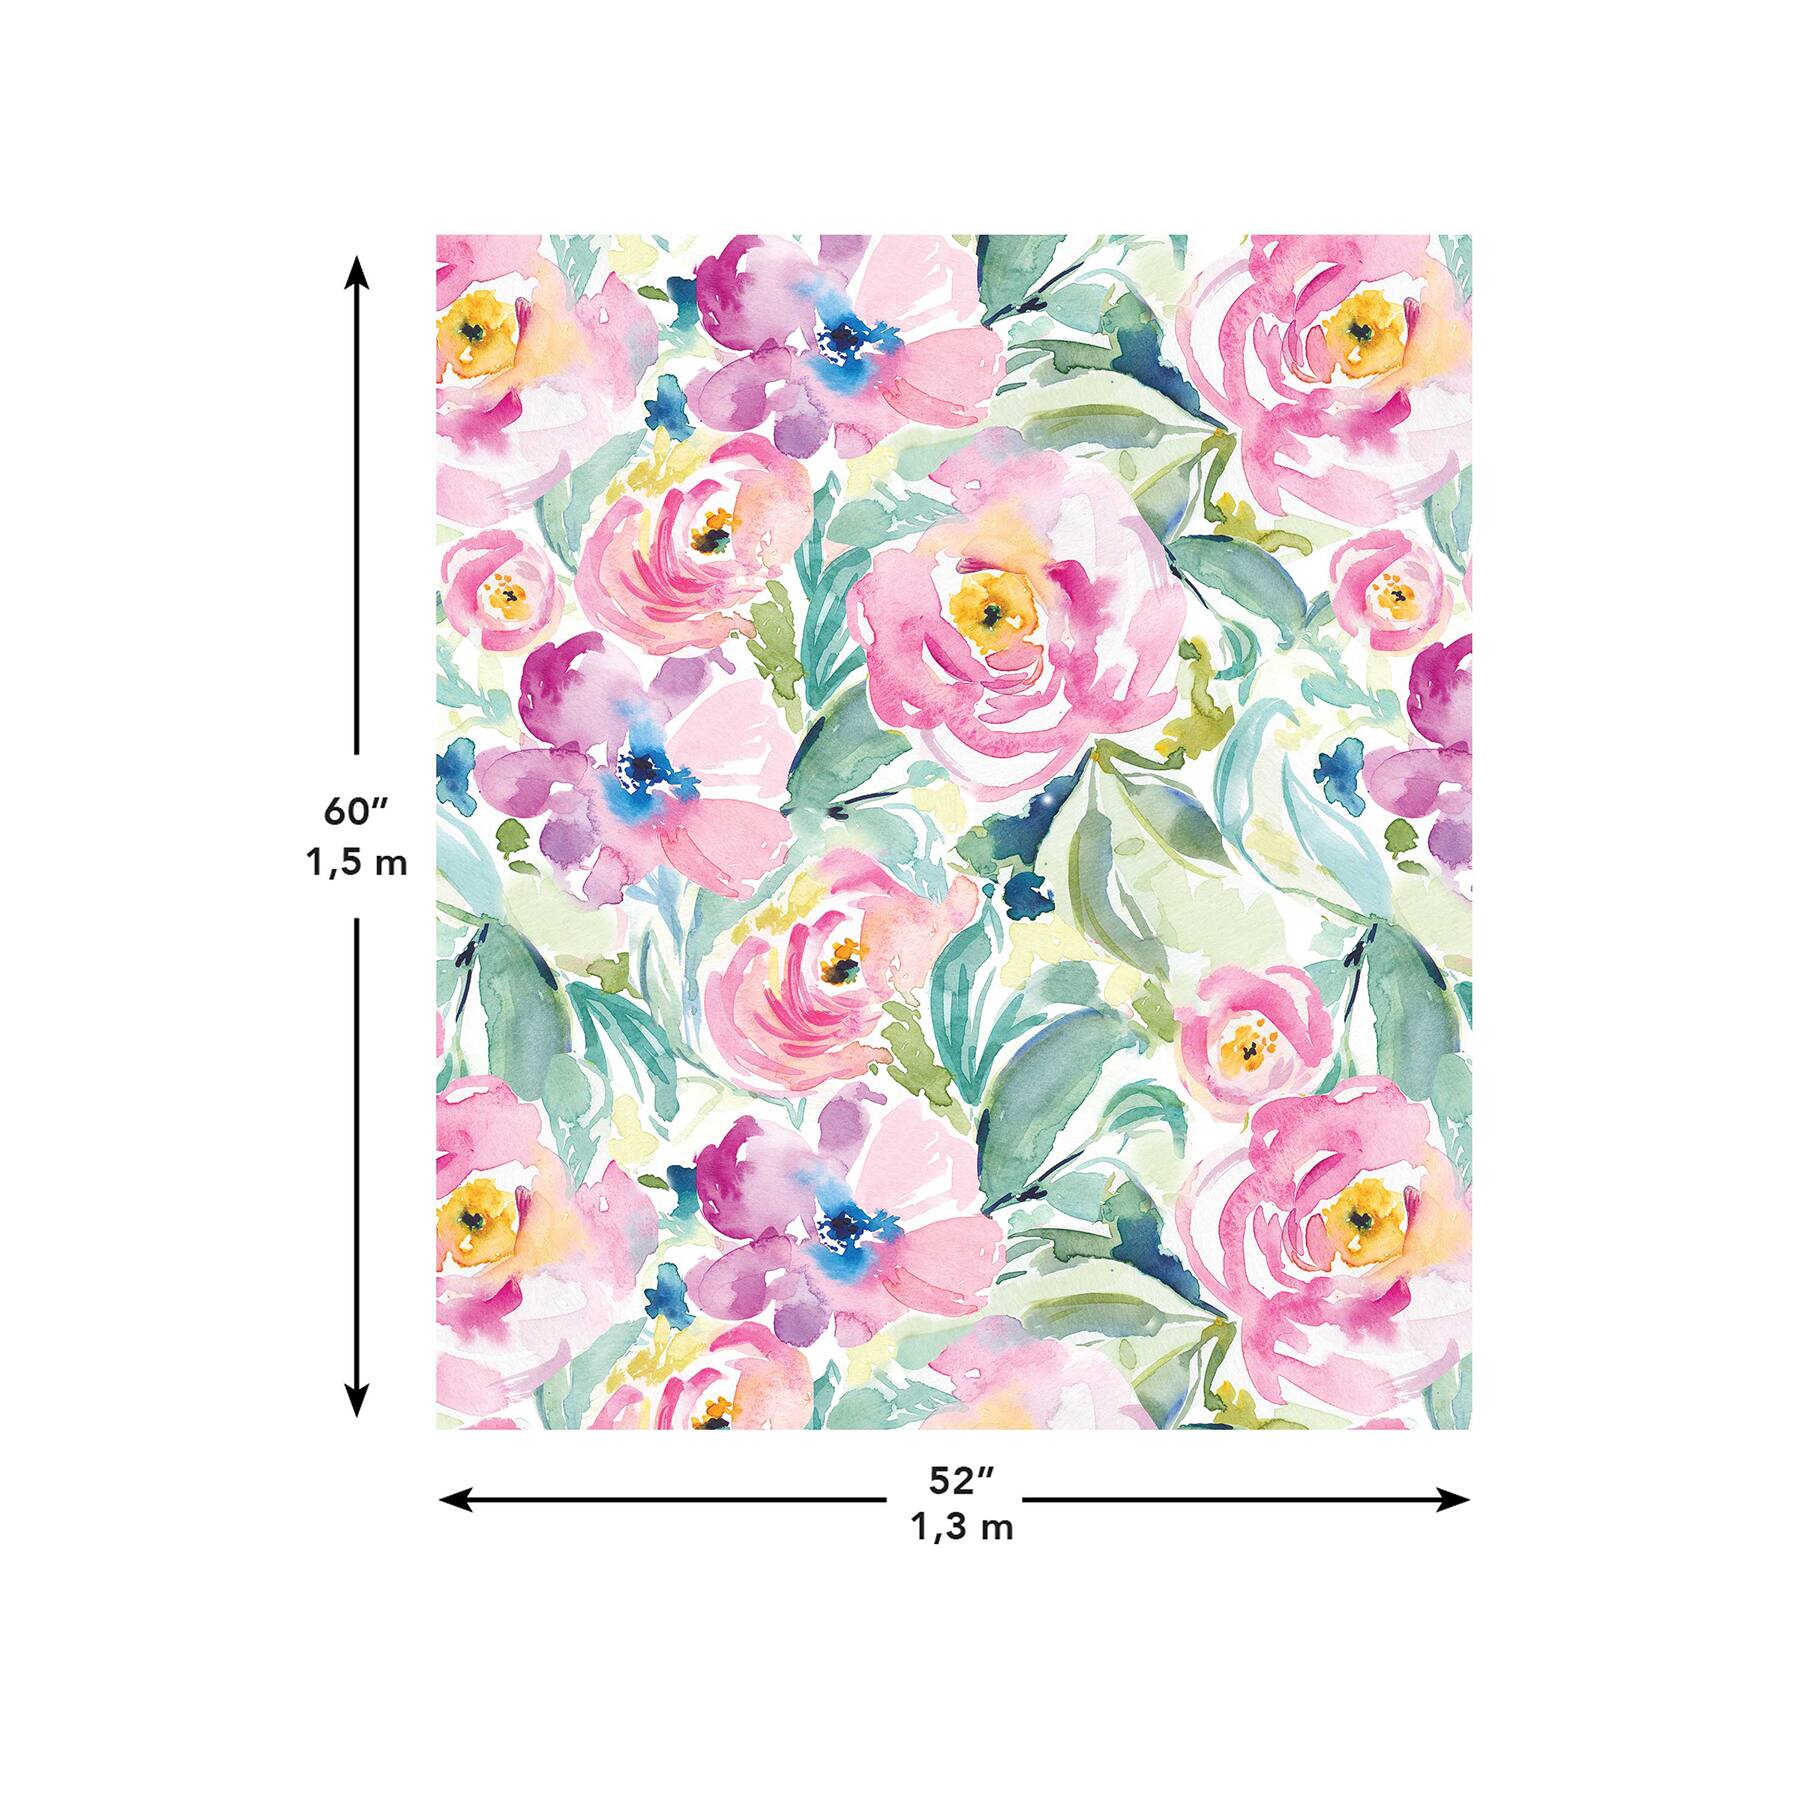 RoomMates Floral Bloom Tapestry